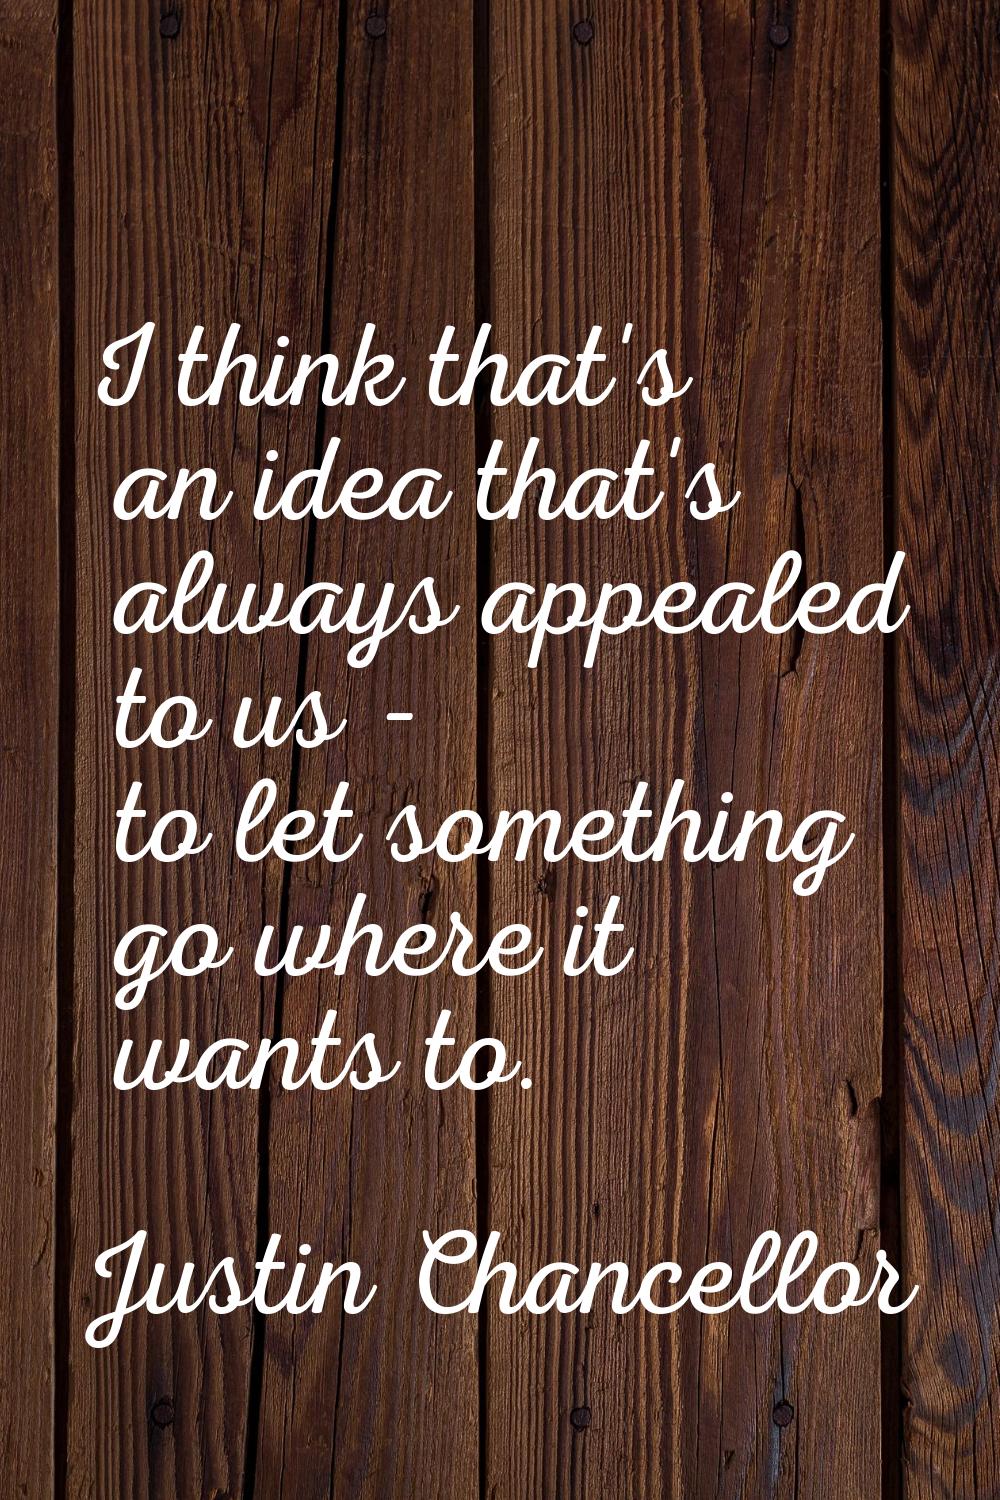 I think that's an idea that's always appealed to us - to let something go where it wants to.